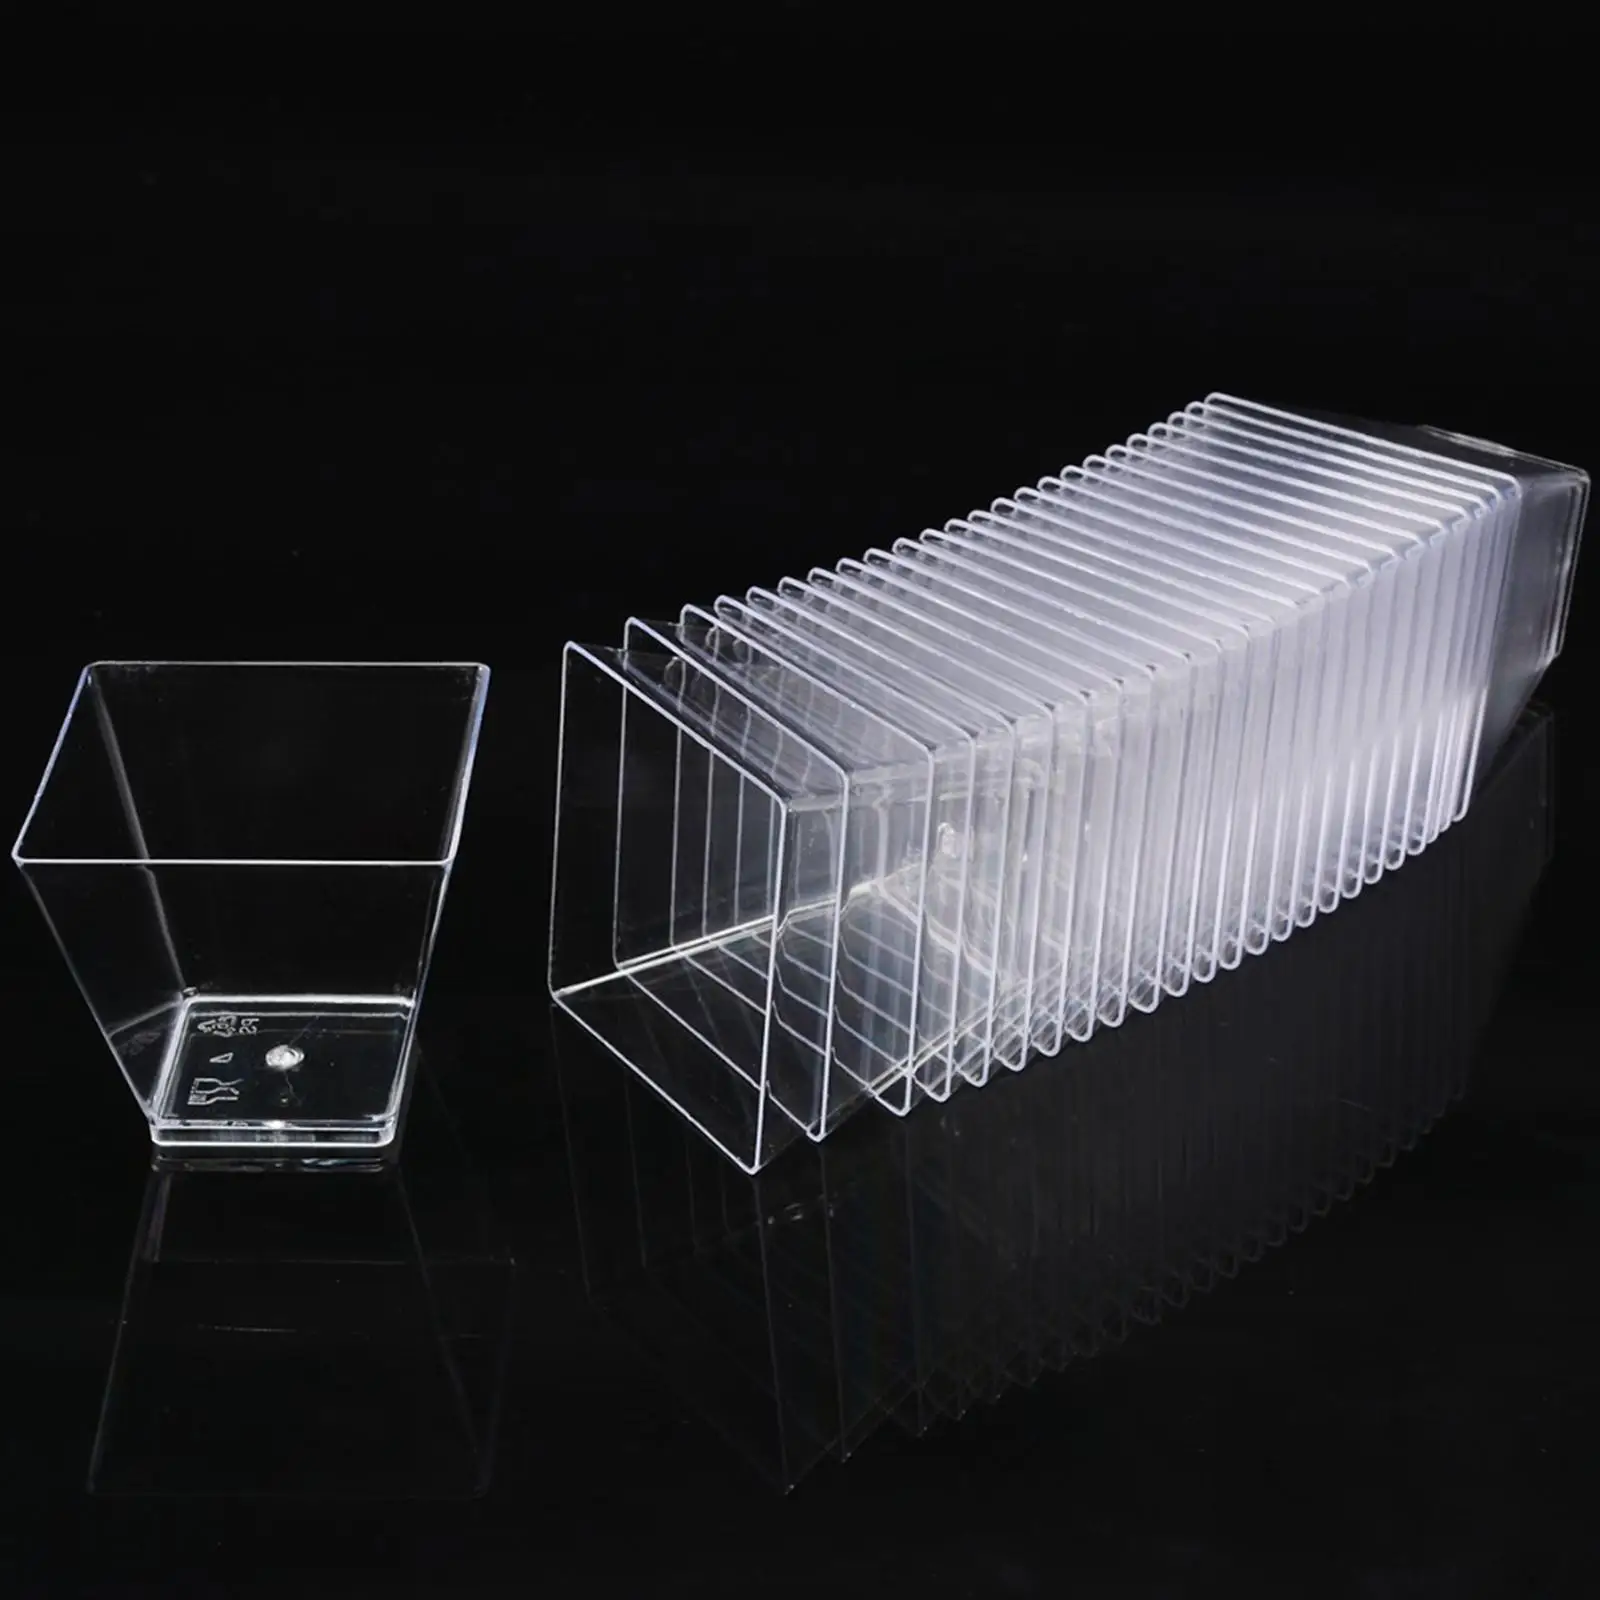 25Pcs Serving Bowl 60ml/ Clear Small Disposable Square Cup for Pudding Tasting Ice Cream Chocolate Cakes Fruit